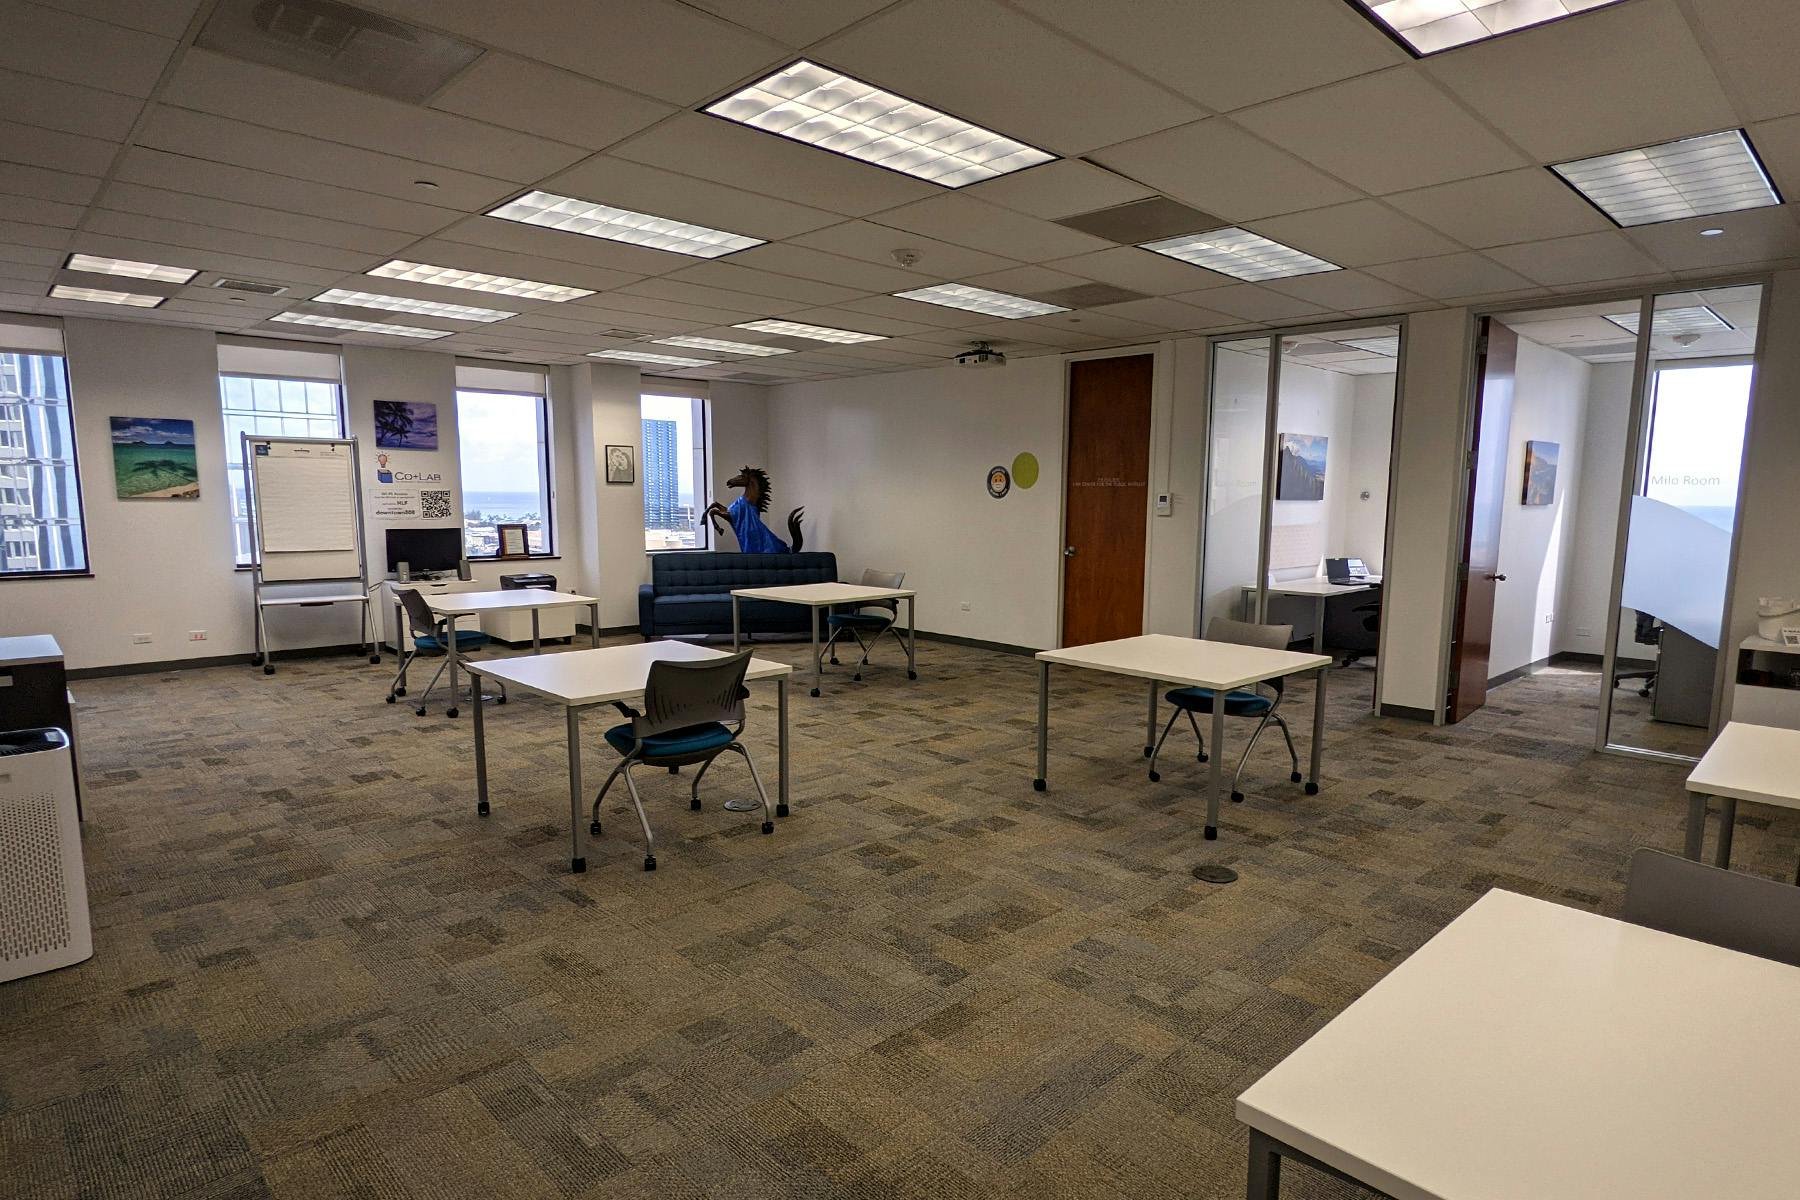 Photo of Co+Lab co-working space